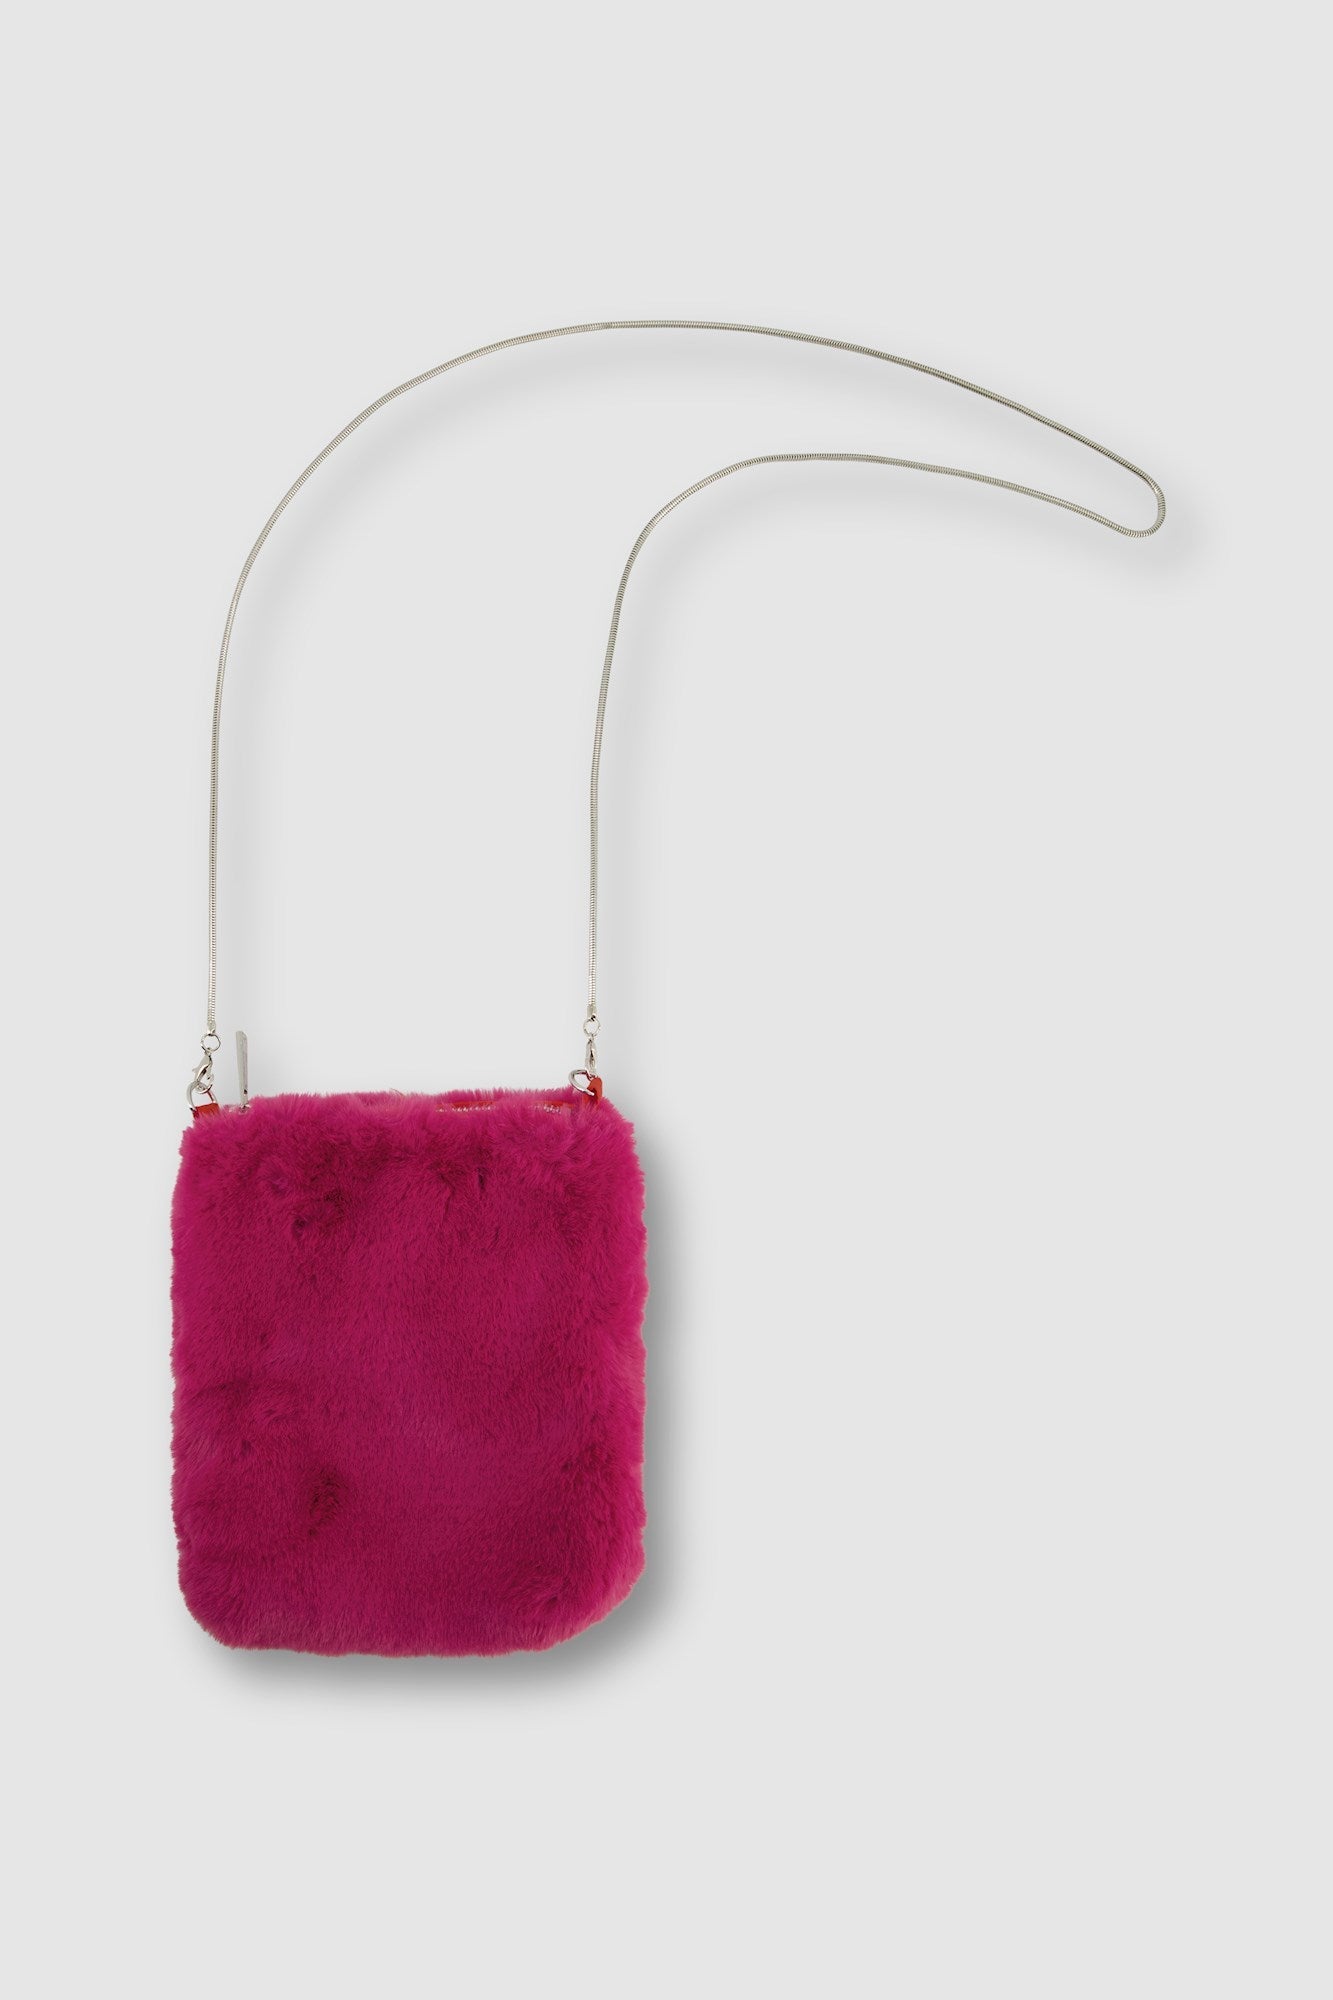 Rino & Pelle - Doxy Small Shoulder Bag - Barberry